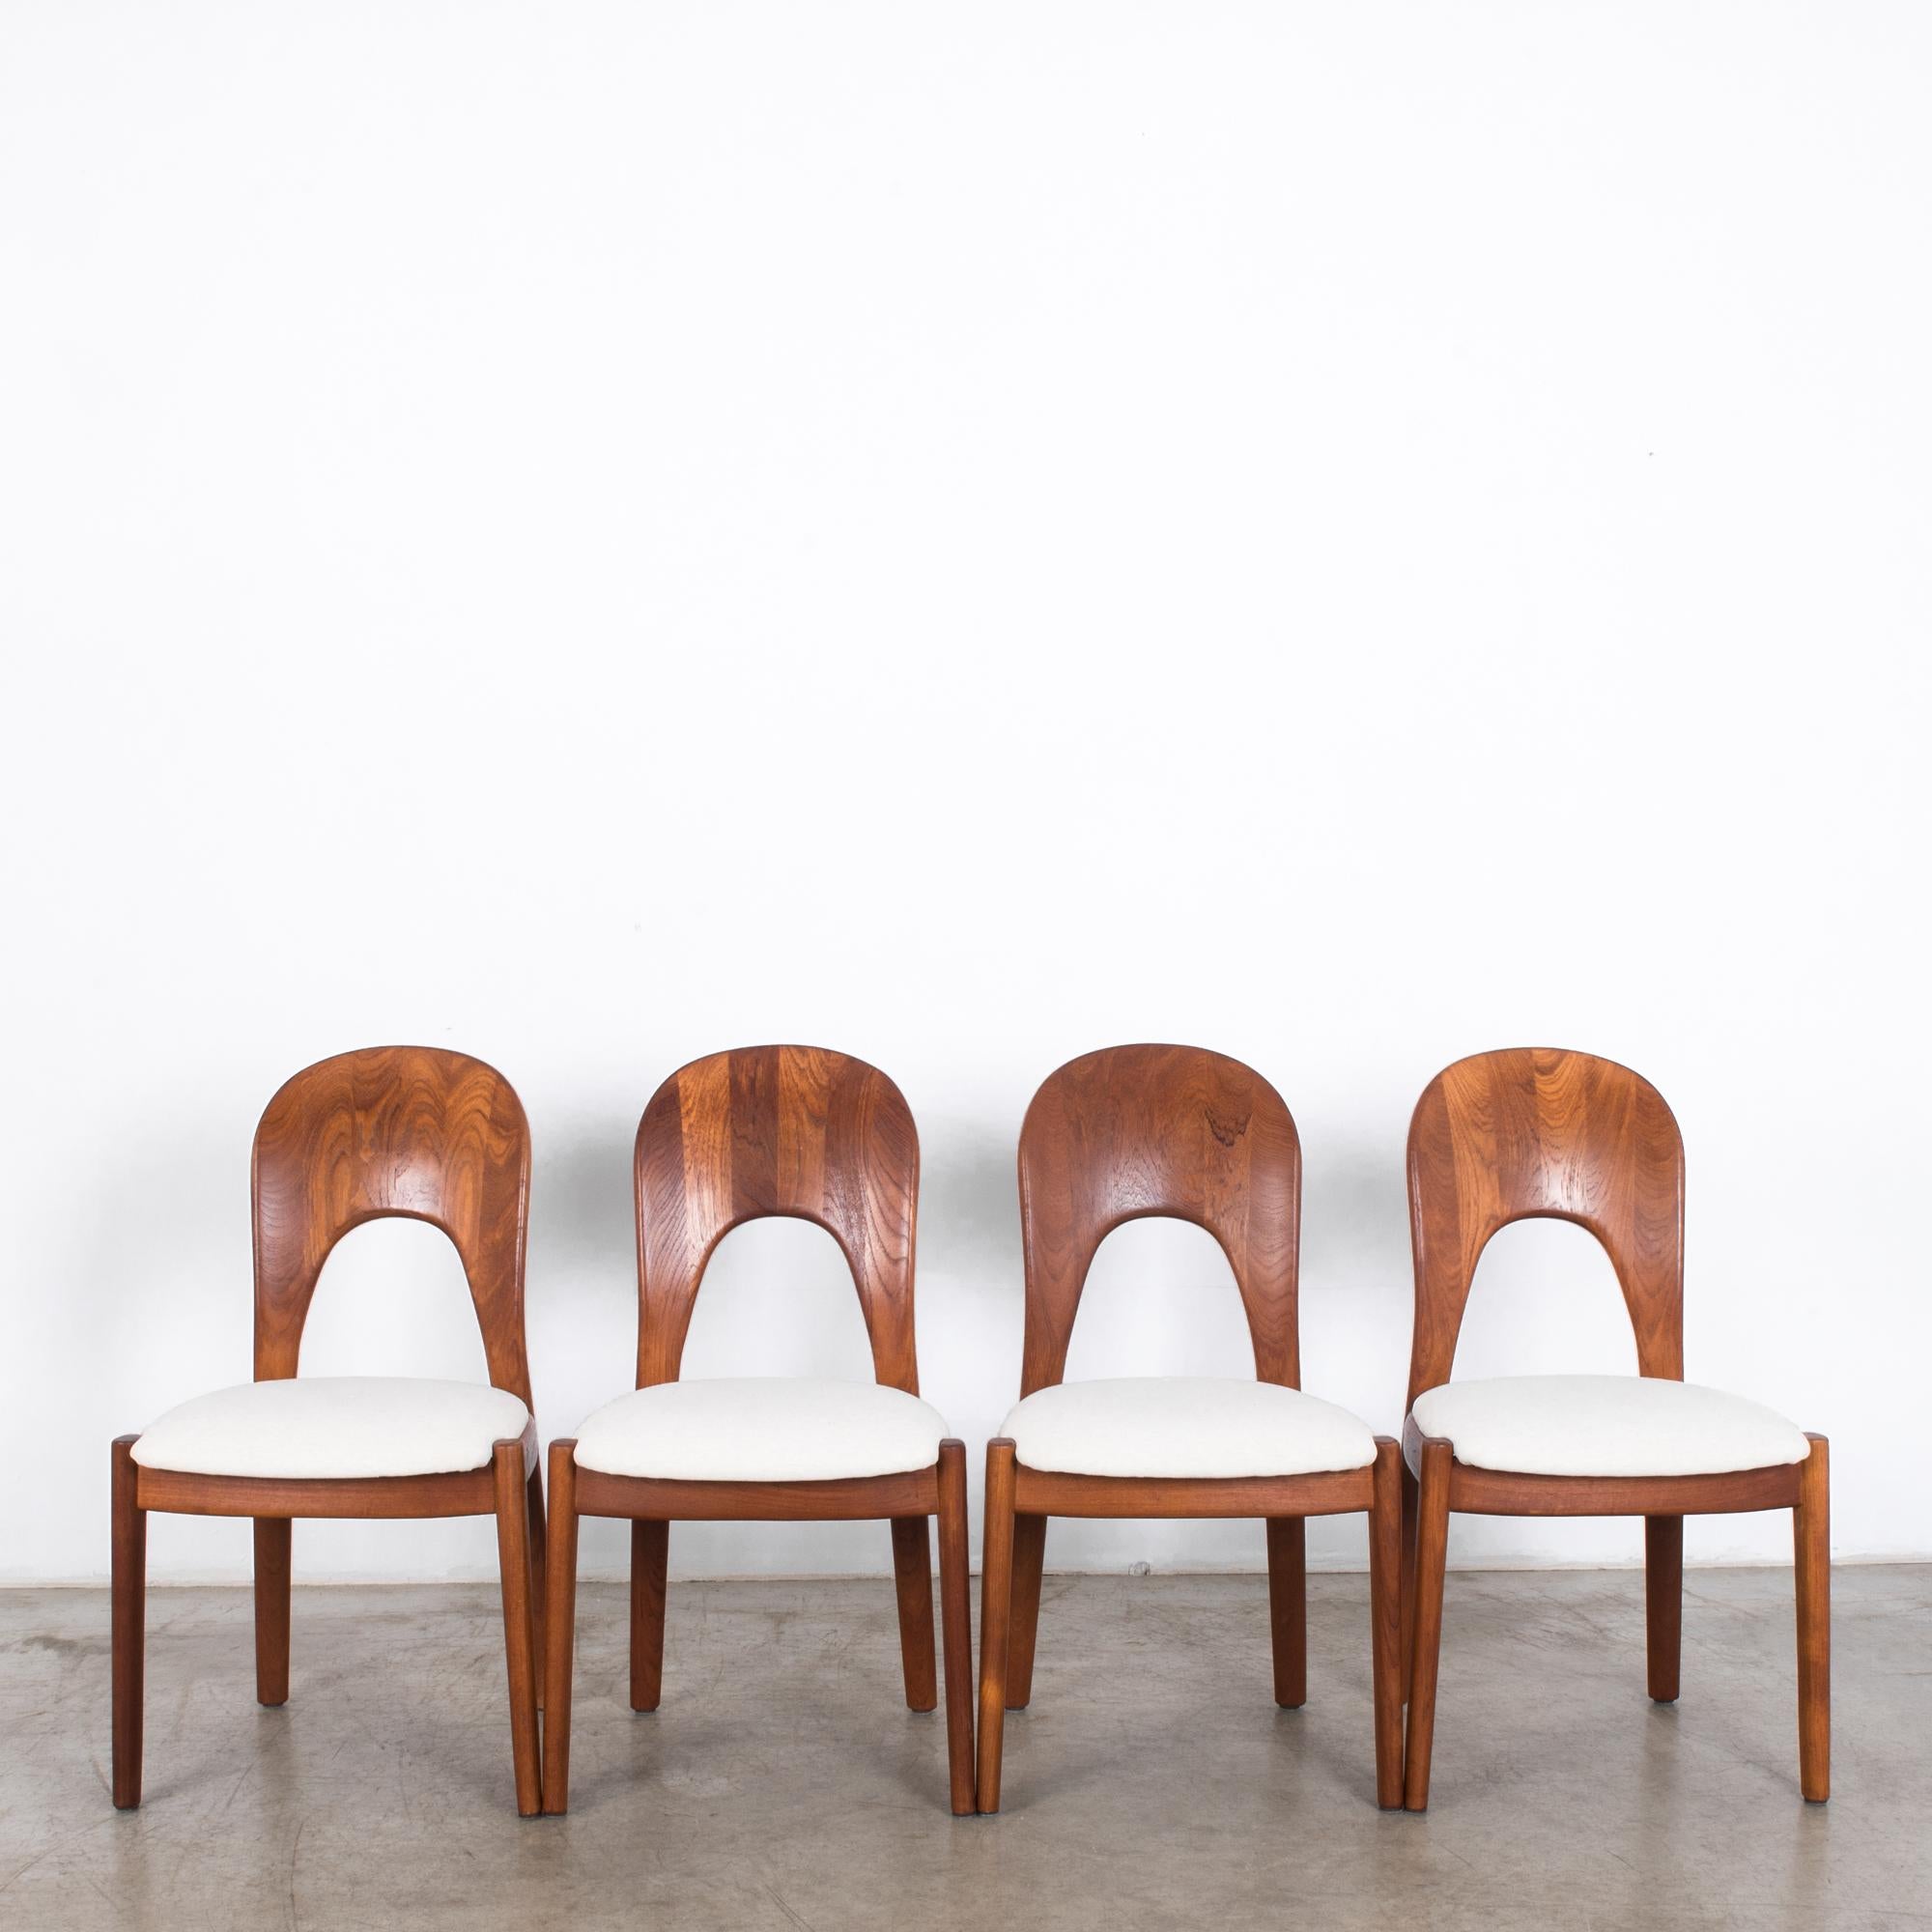 A set of four teak dining chairs from Denmark, circa 1970. Smooth curves and rounded forms speak to Scandinavian modernism, while a spoon-backed silhouette and a cushioned seat echo classic dining chair design. Reupholstered in a natural white